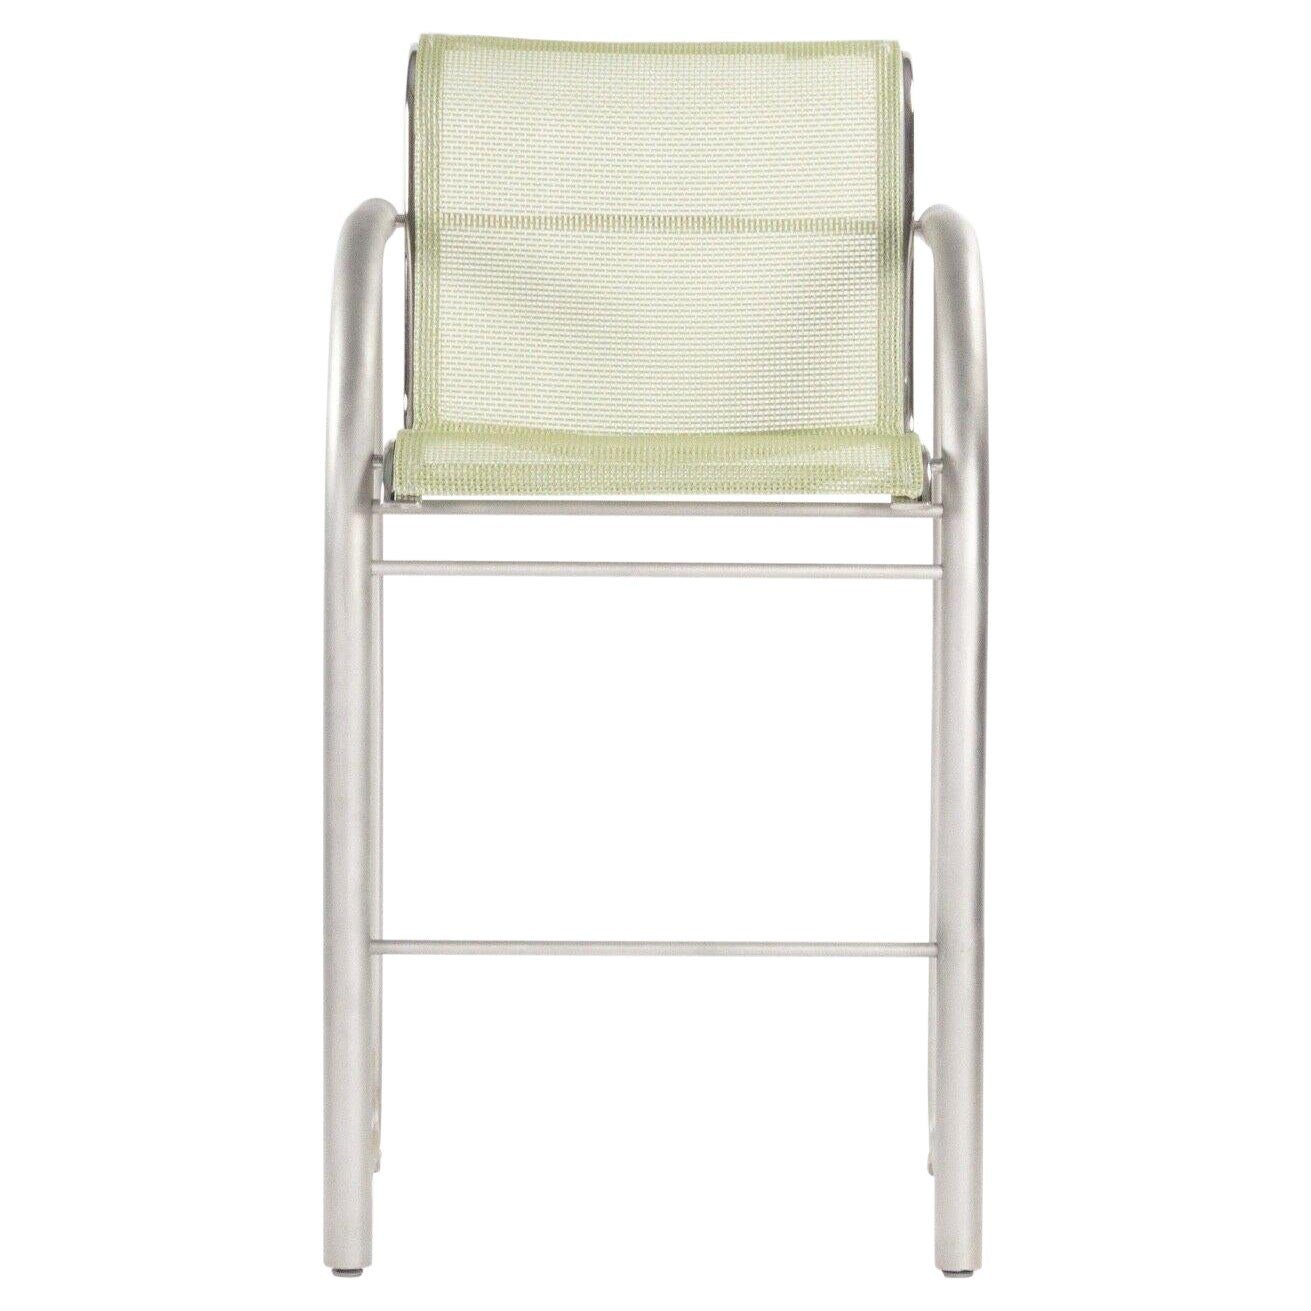 Prototype Richard Schultz 2002 Collection Stainless Bar Stool with Outdoor Mesh For Sale